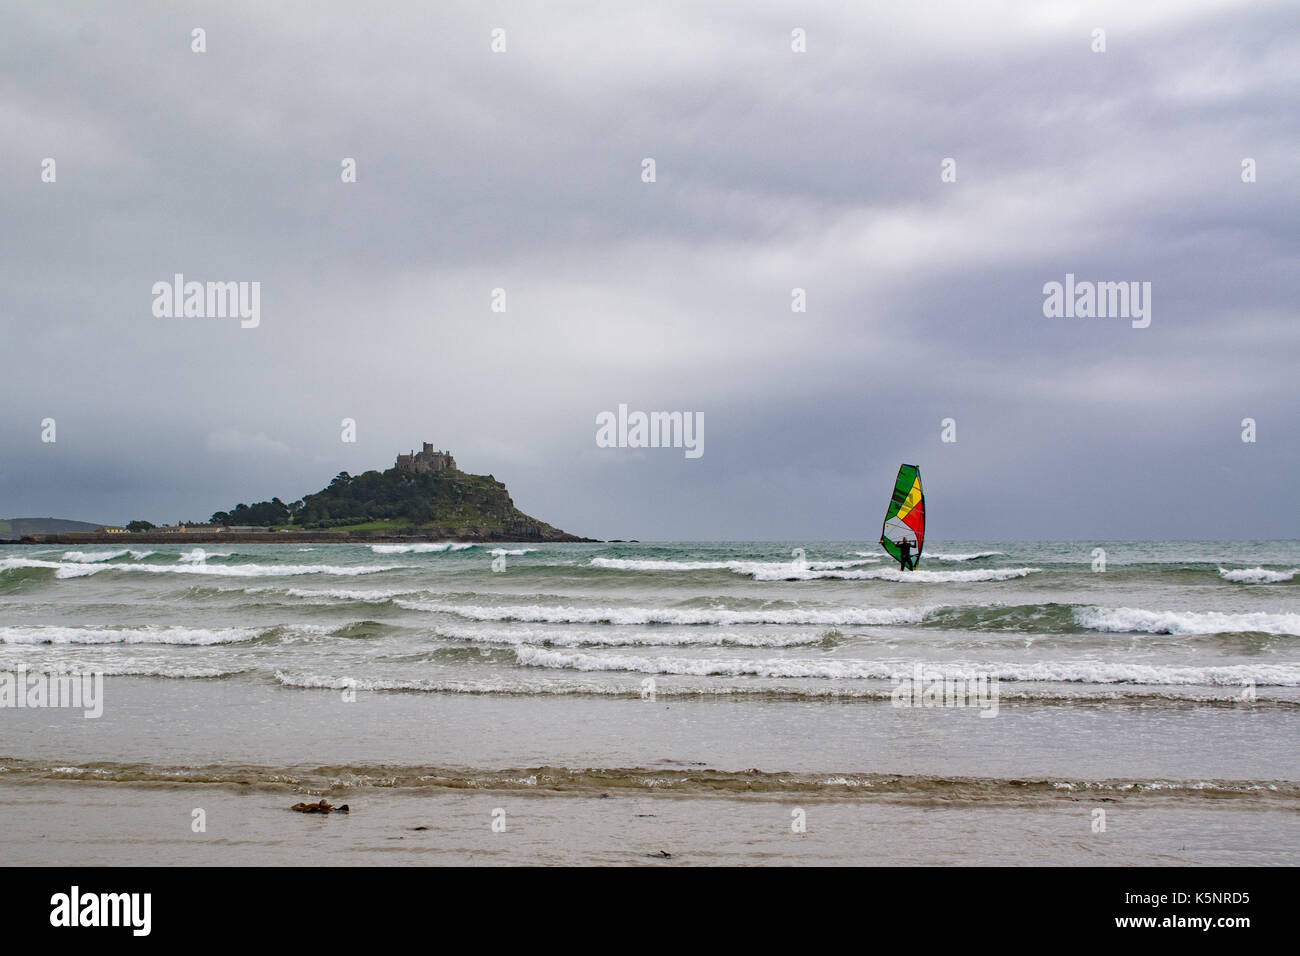 Longrock,  Cornwall, UK. 10th September 2017. UK Weather. The weather was changing rapidly at Longrock near marazion in Cornwall. One minute heavy rain and strong winds, then bright sunshine. Windsurfers were out enjoying the waves and wind. Credit: Simon Maycock/Alamy Live News Stock Photo